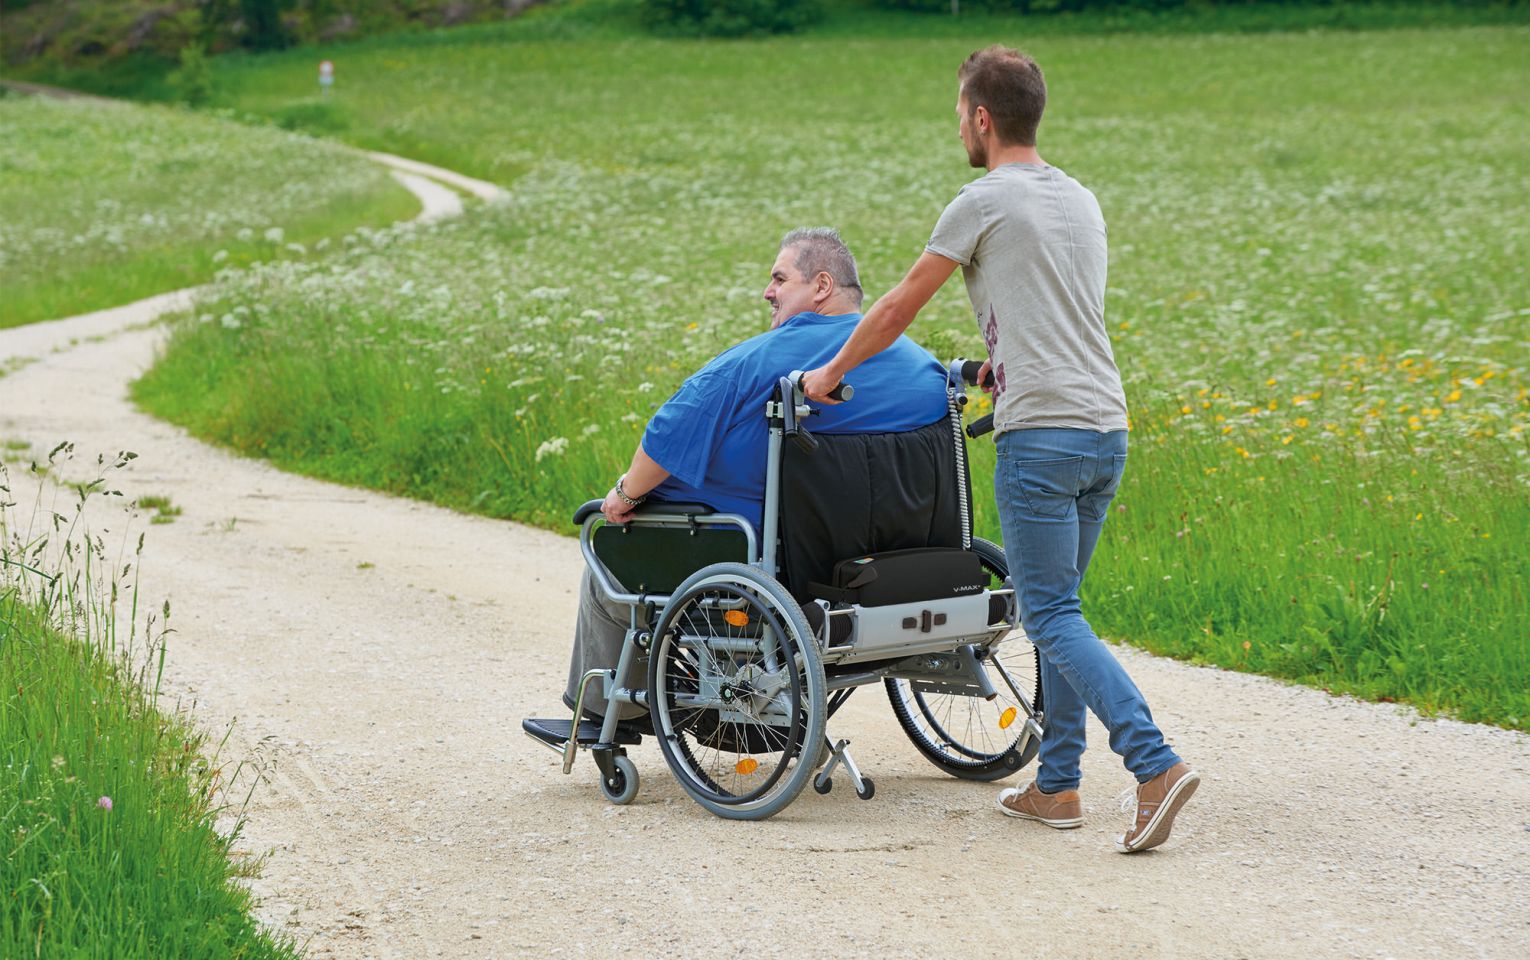 The picture shows a slim, middle-aged man pushing another man in an XXL wheelchair along a country lane. The wheelchair occupant has a very high body weight, which is why there is a V-MAX+ braking and pushing aid at the back of the wheelchair, which supports the accompanying person when pushing and braking the wheelchair. 